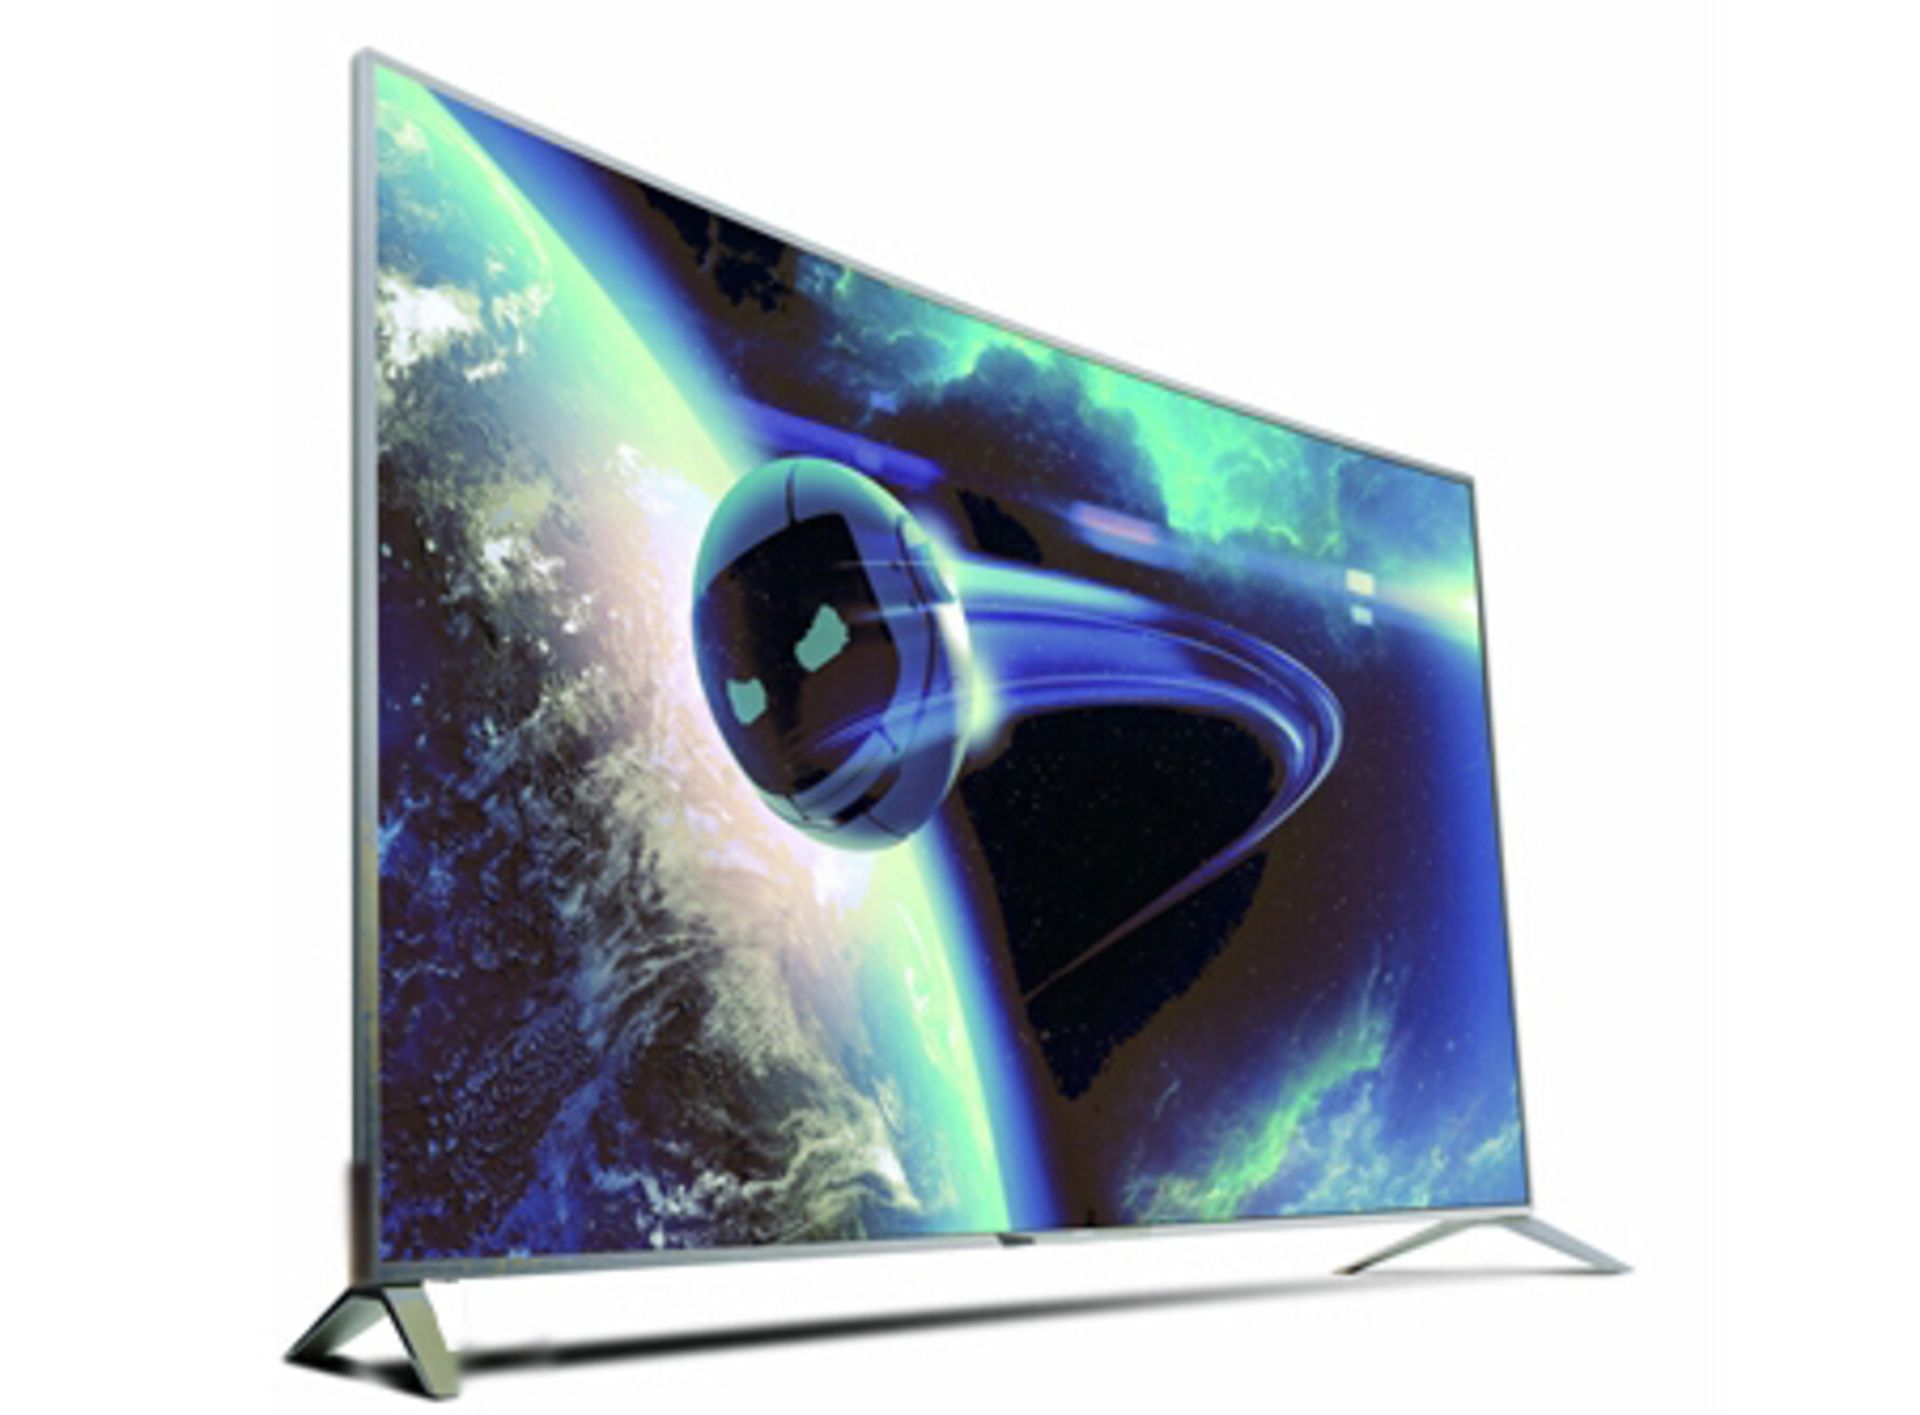 1 x BOXED BRAND NEW 55" CURVED ELED SMART TV HDD,WIFI,RJ45,REMOTE APPS, CABLES, *PLEASE NOTE THAT